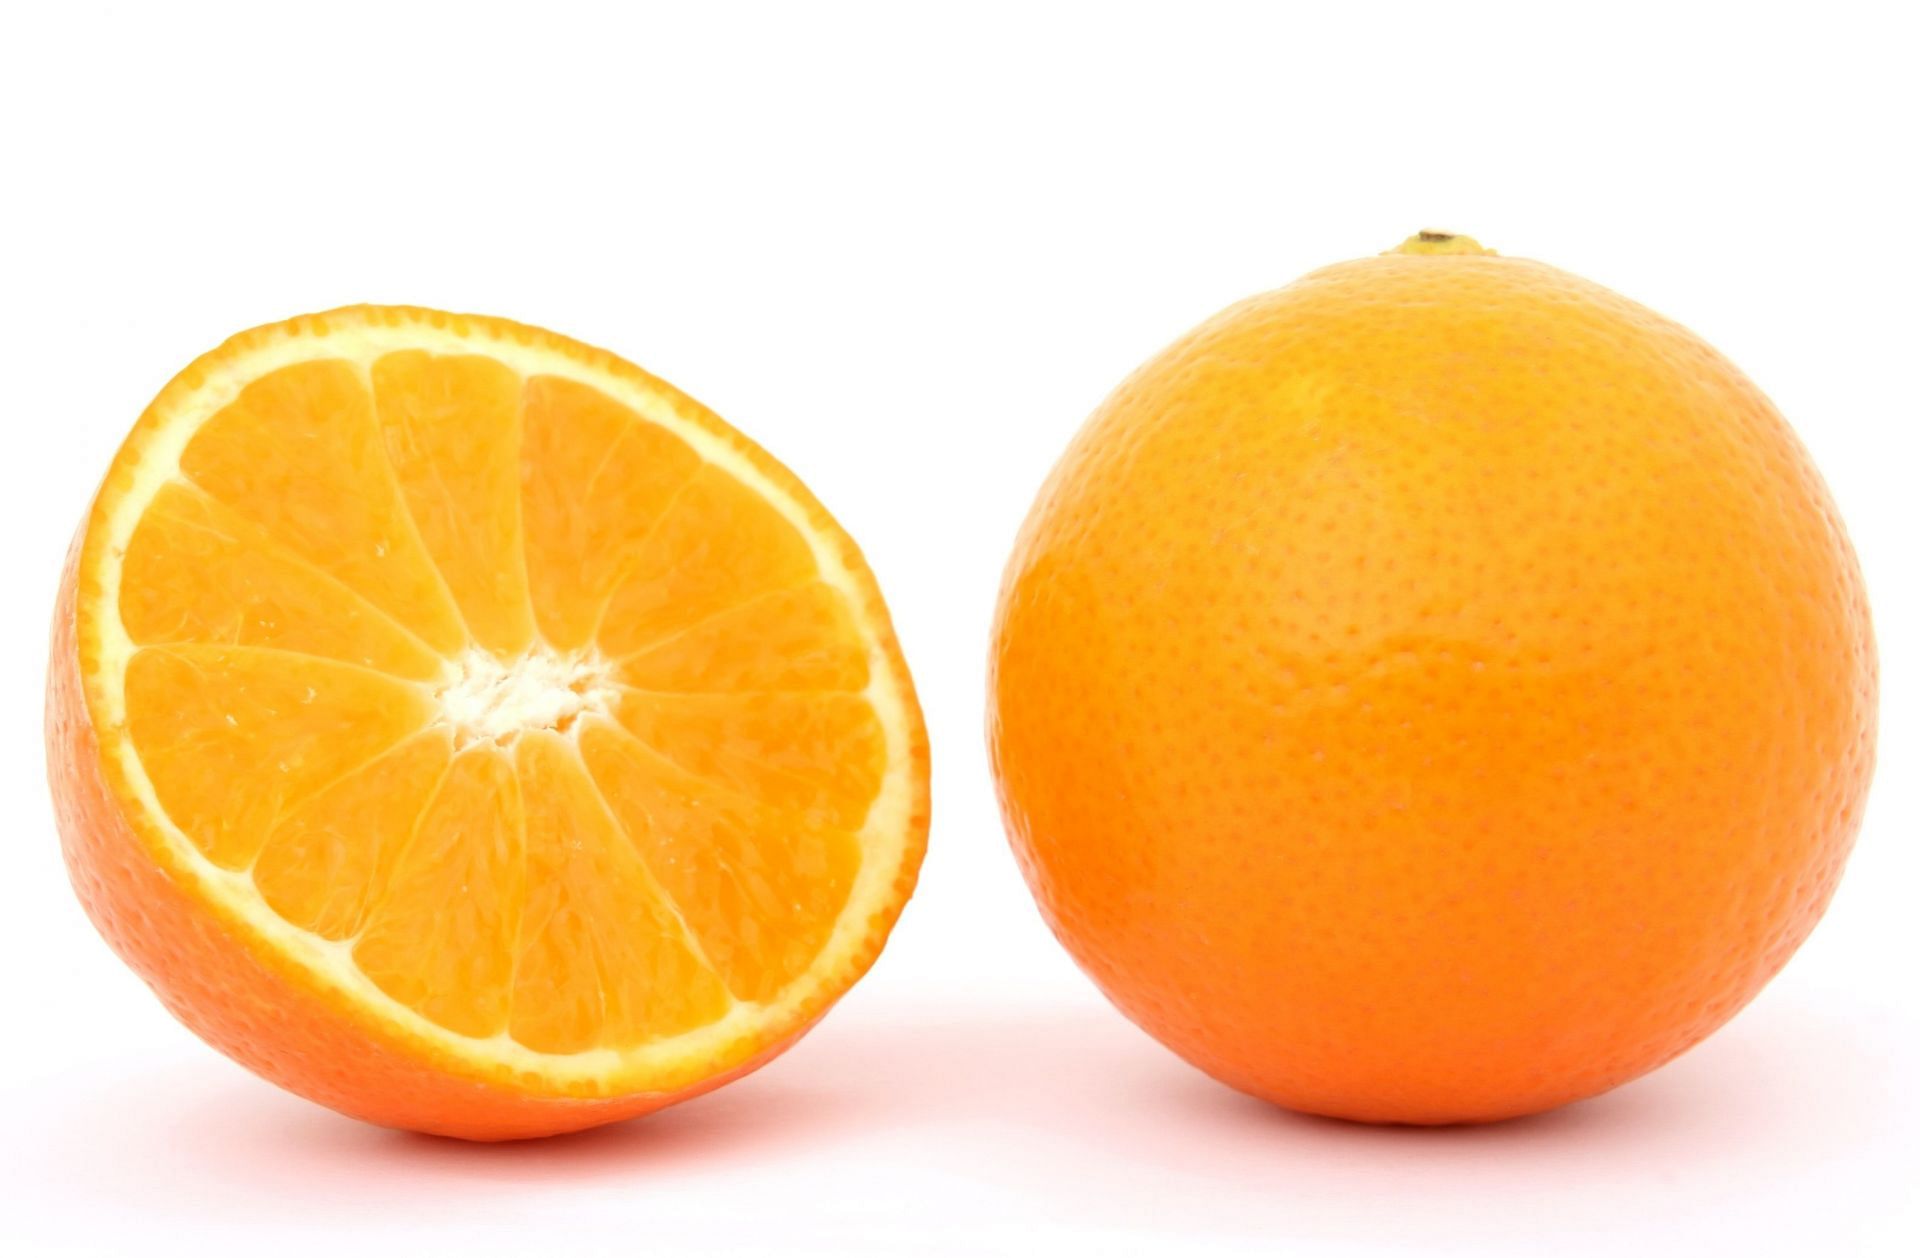 What Is Citric Acid, and Is It Bad for You?